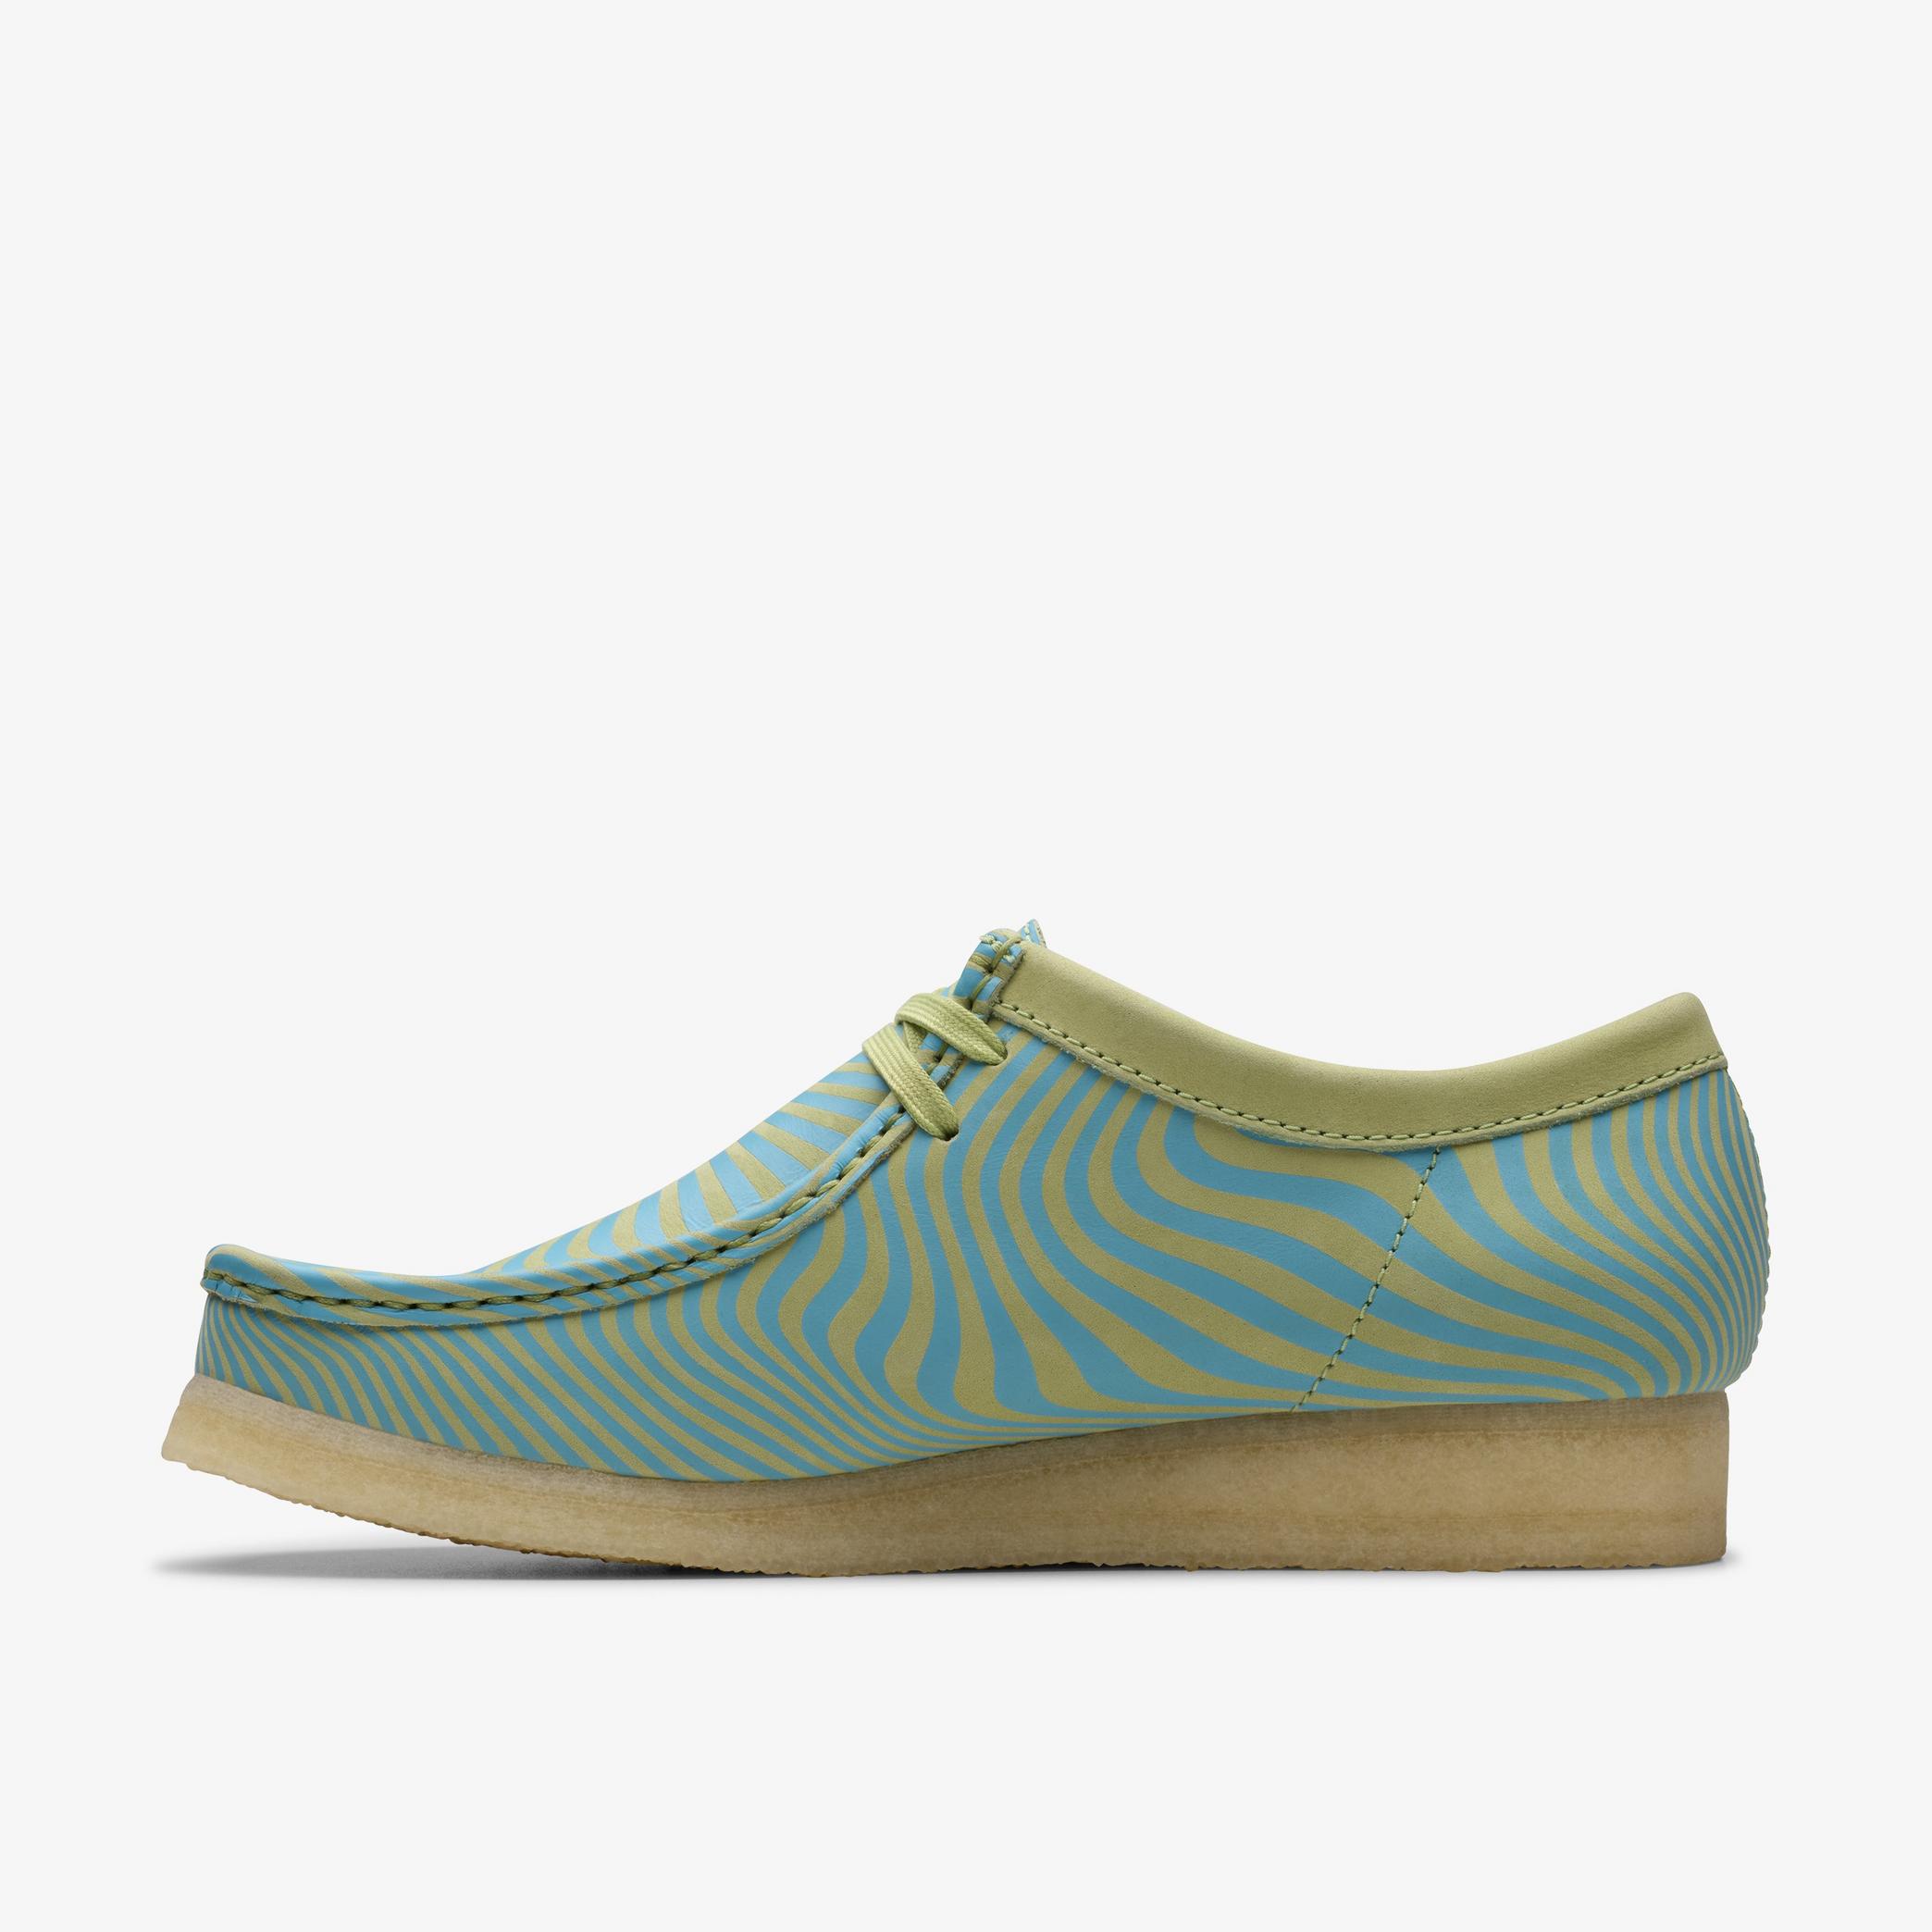 Wallabee Blue/Lime Print Wallabee, view 2 of 7